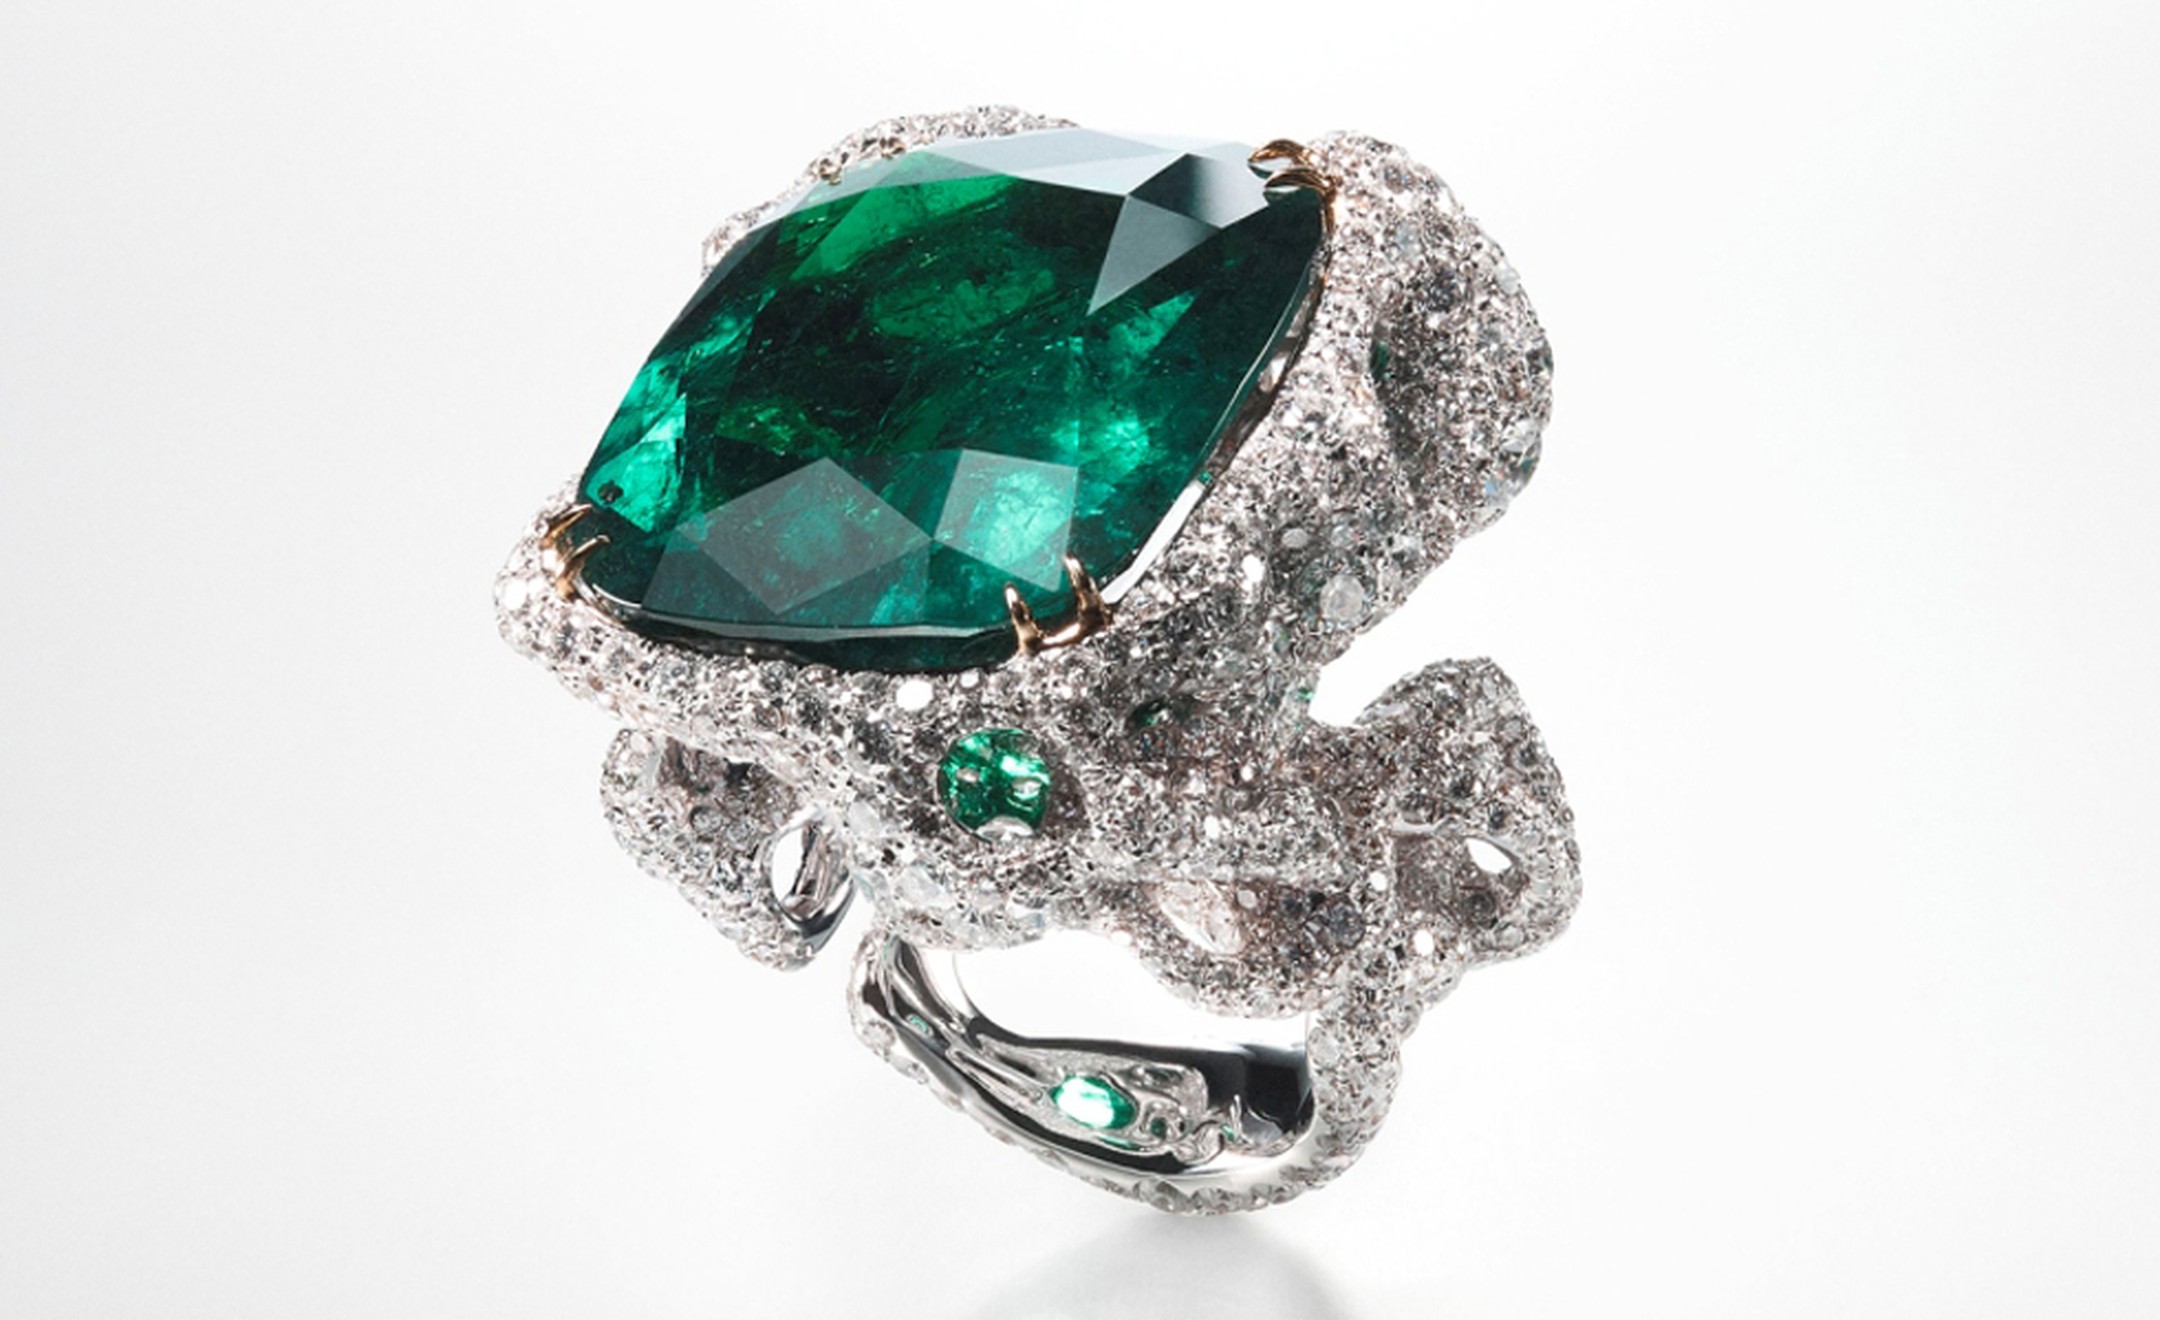 CINDY CHAO, The Art Jewel, Black Label Masterpiece Emerald City Ring with central emerald (44cts) highlighted by diamonds set in 18kt white gold